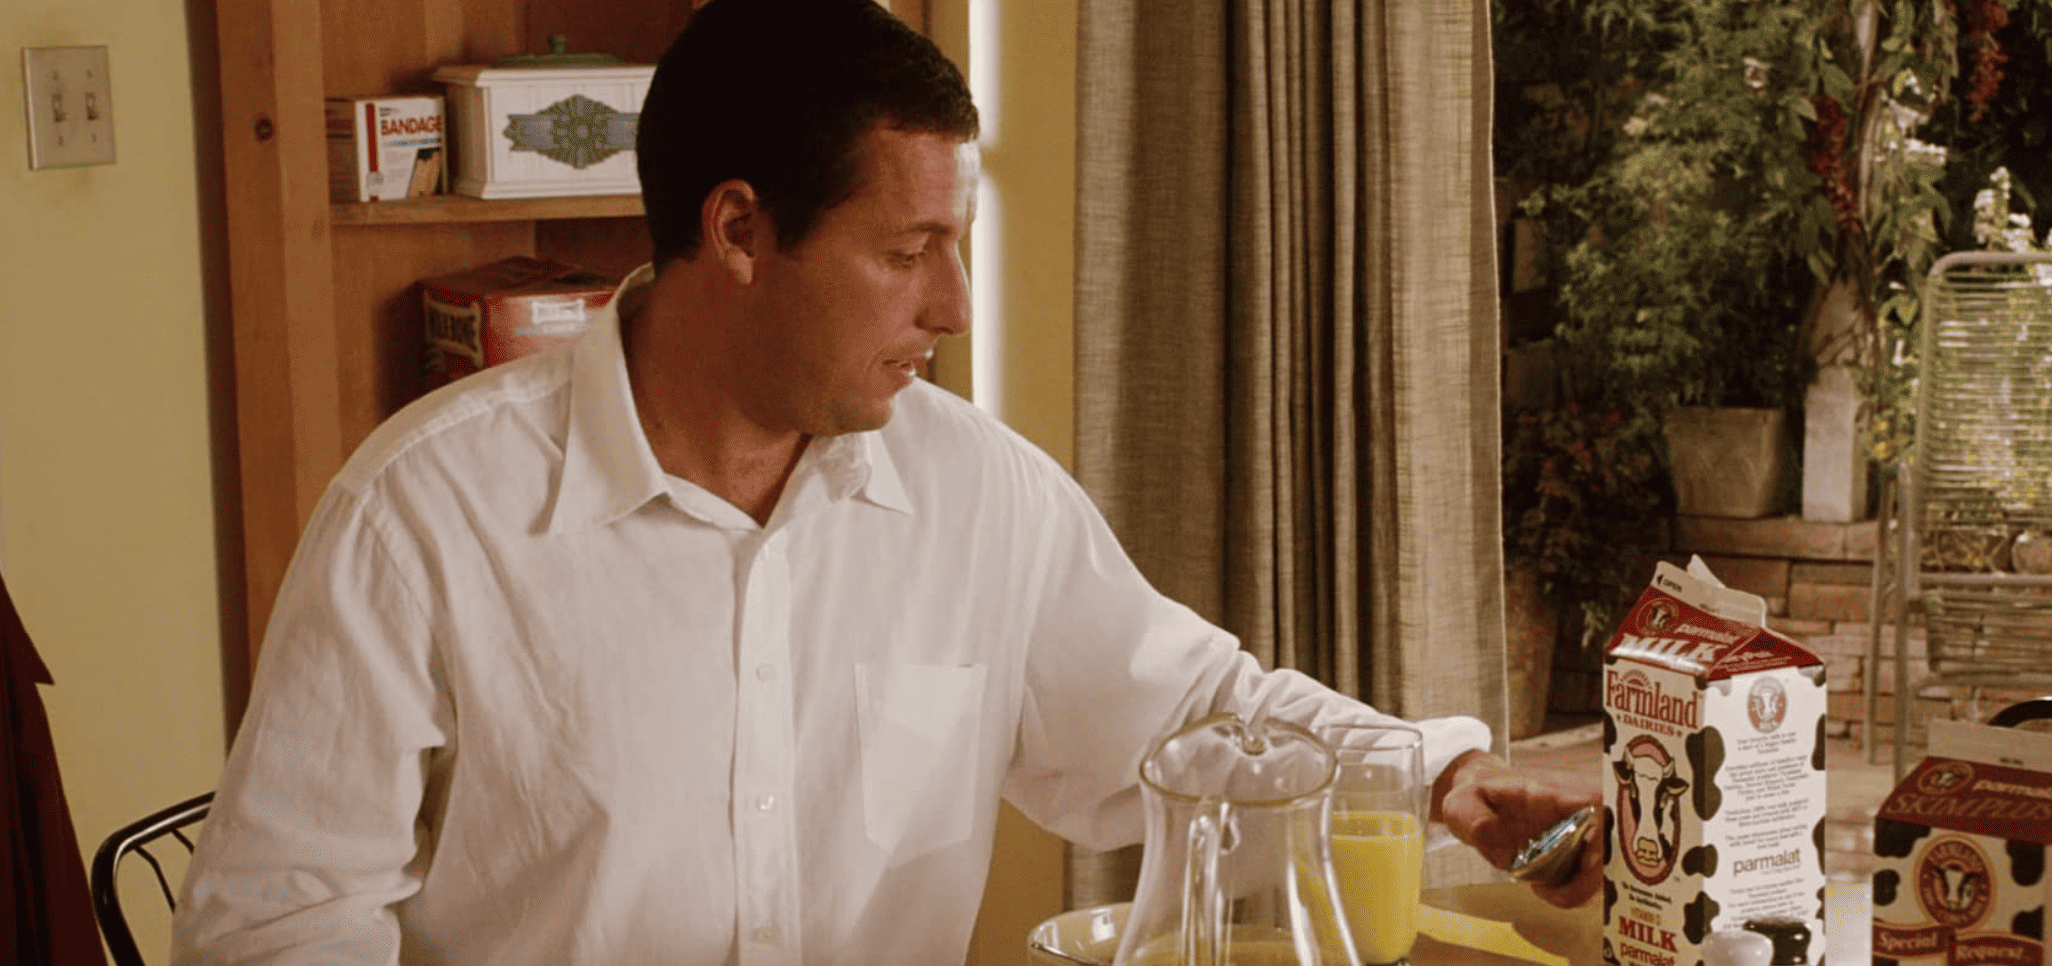 Adam Sandler as Michael Newman sitting at his kitchen table holding a magical remote in this image from Columbia Pictures